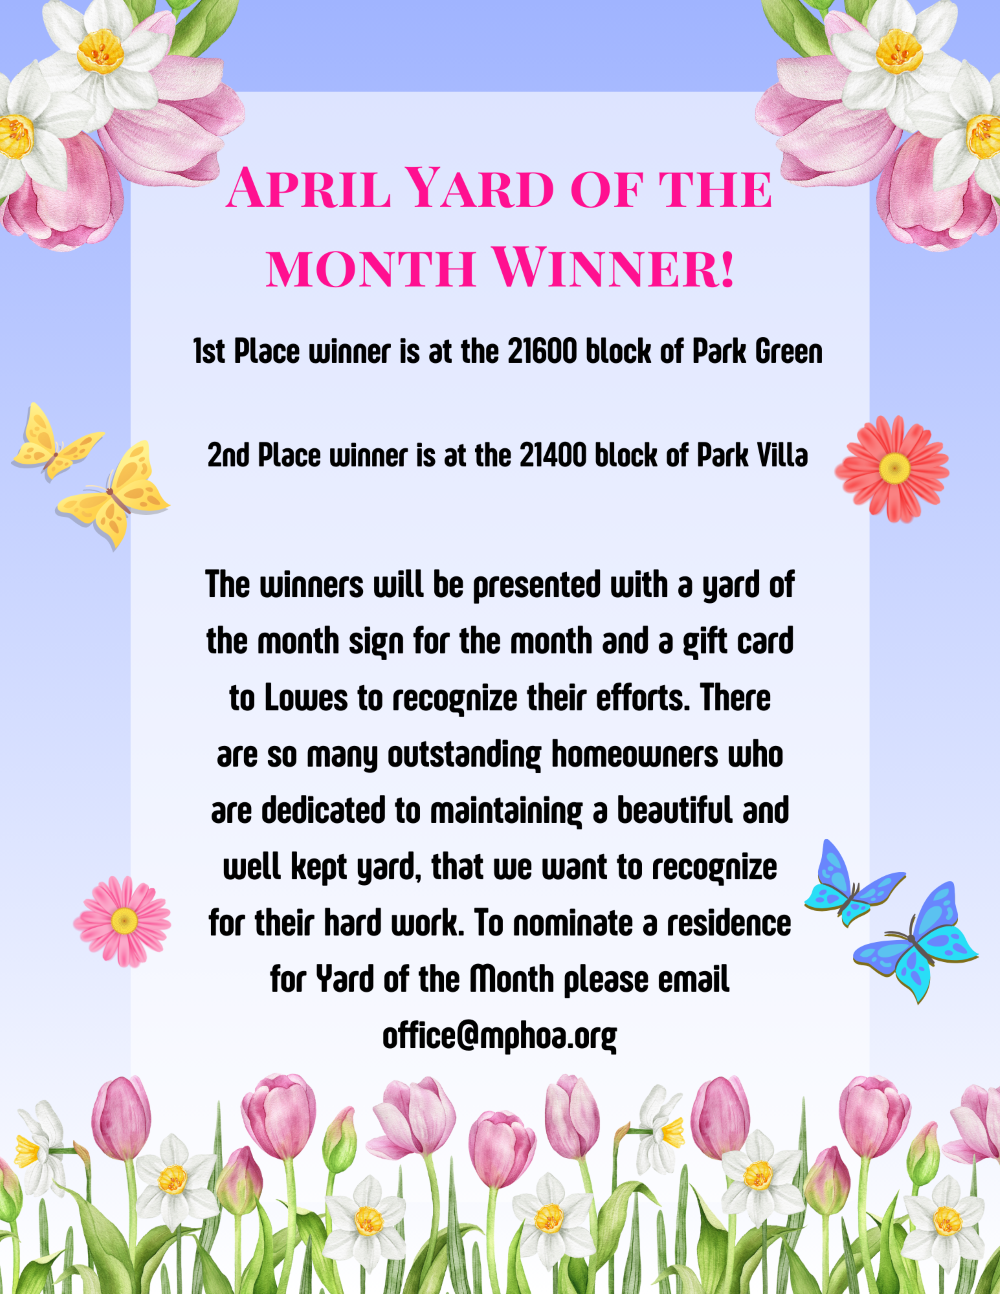 April Yard of the Month Winner!